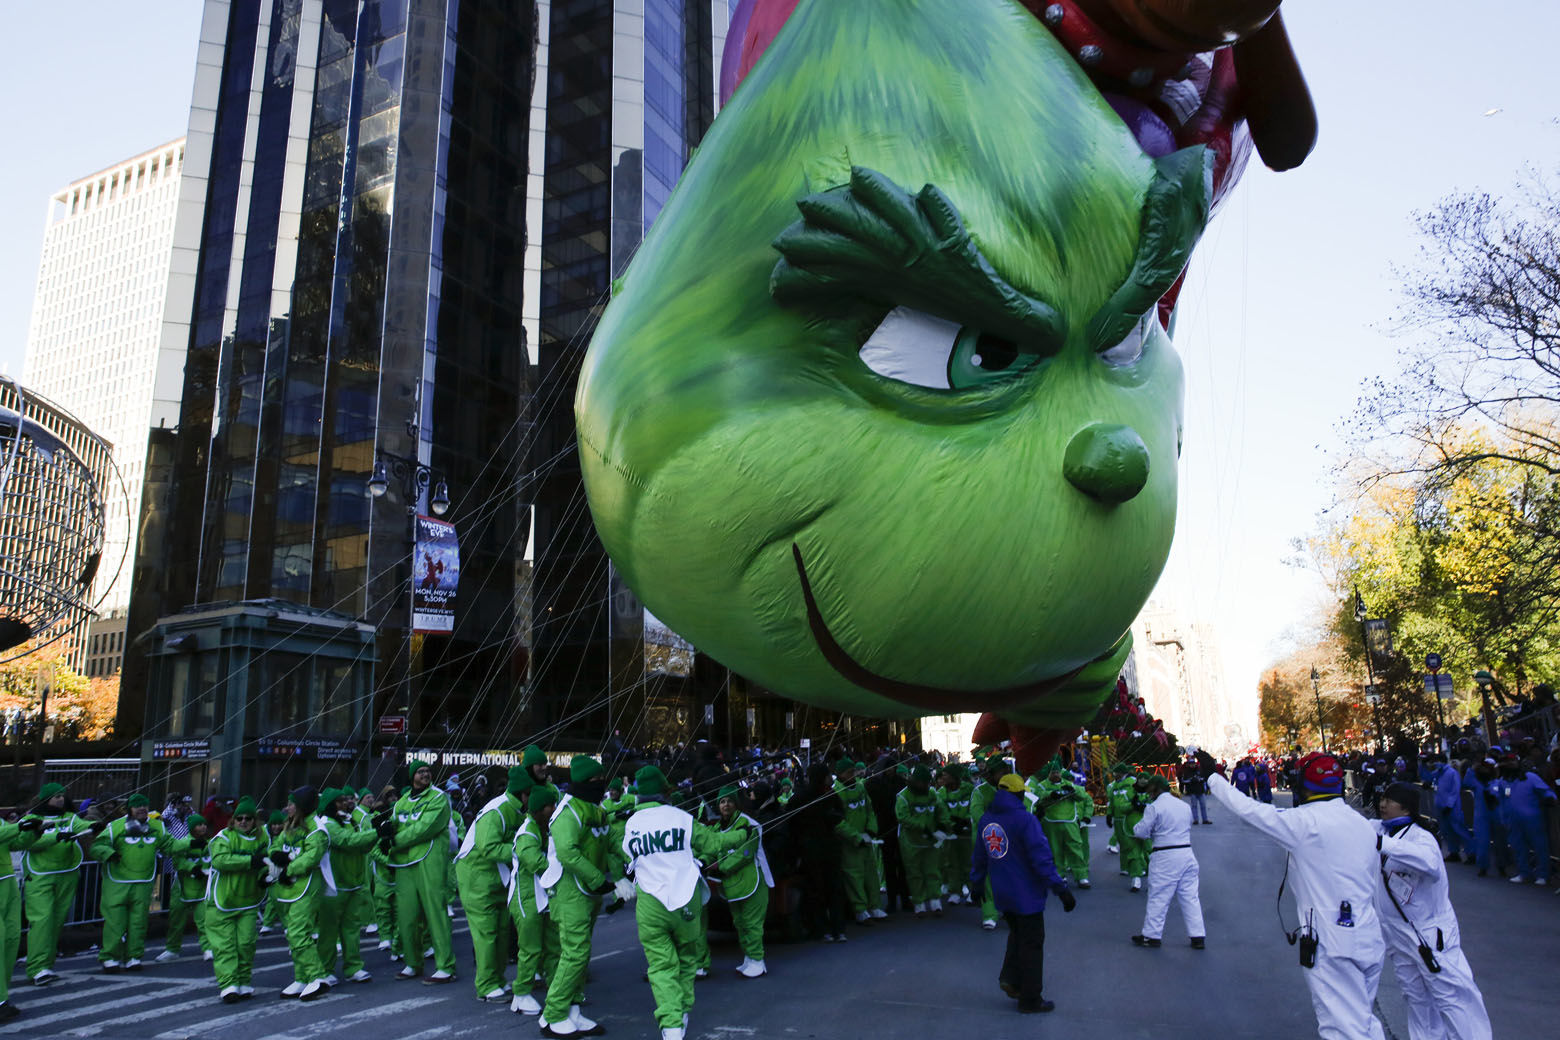 Performers fight to hold their position on The Grinch balloon as it floats over Central Park West during the 92nd annual Macy's Thanksgiving Day Parade in New York, Thursday, Nov. 22, 2018. (AP Photo/Eduardo Munoz Alvarez)